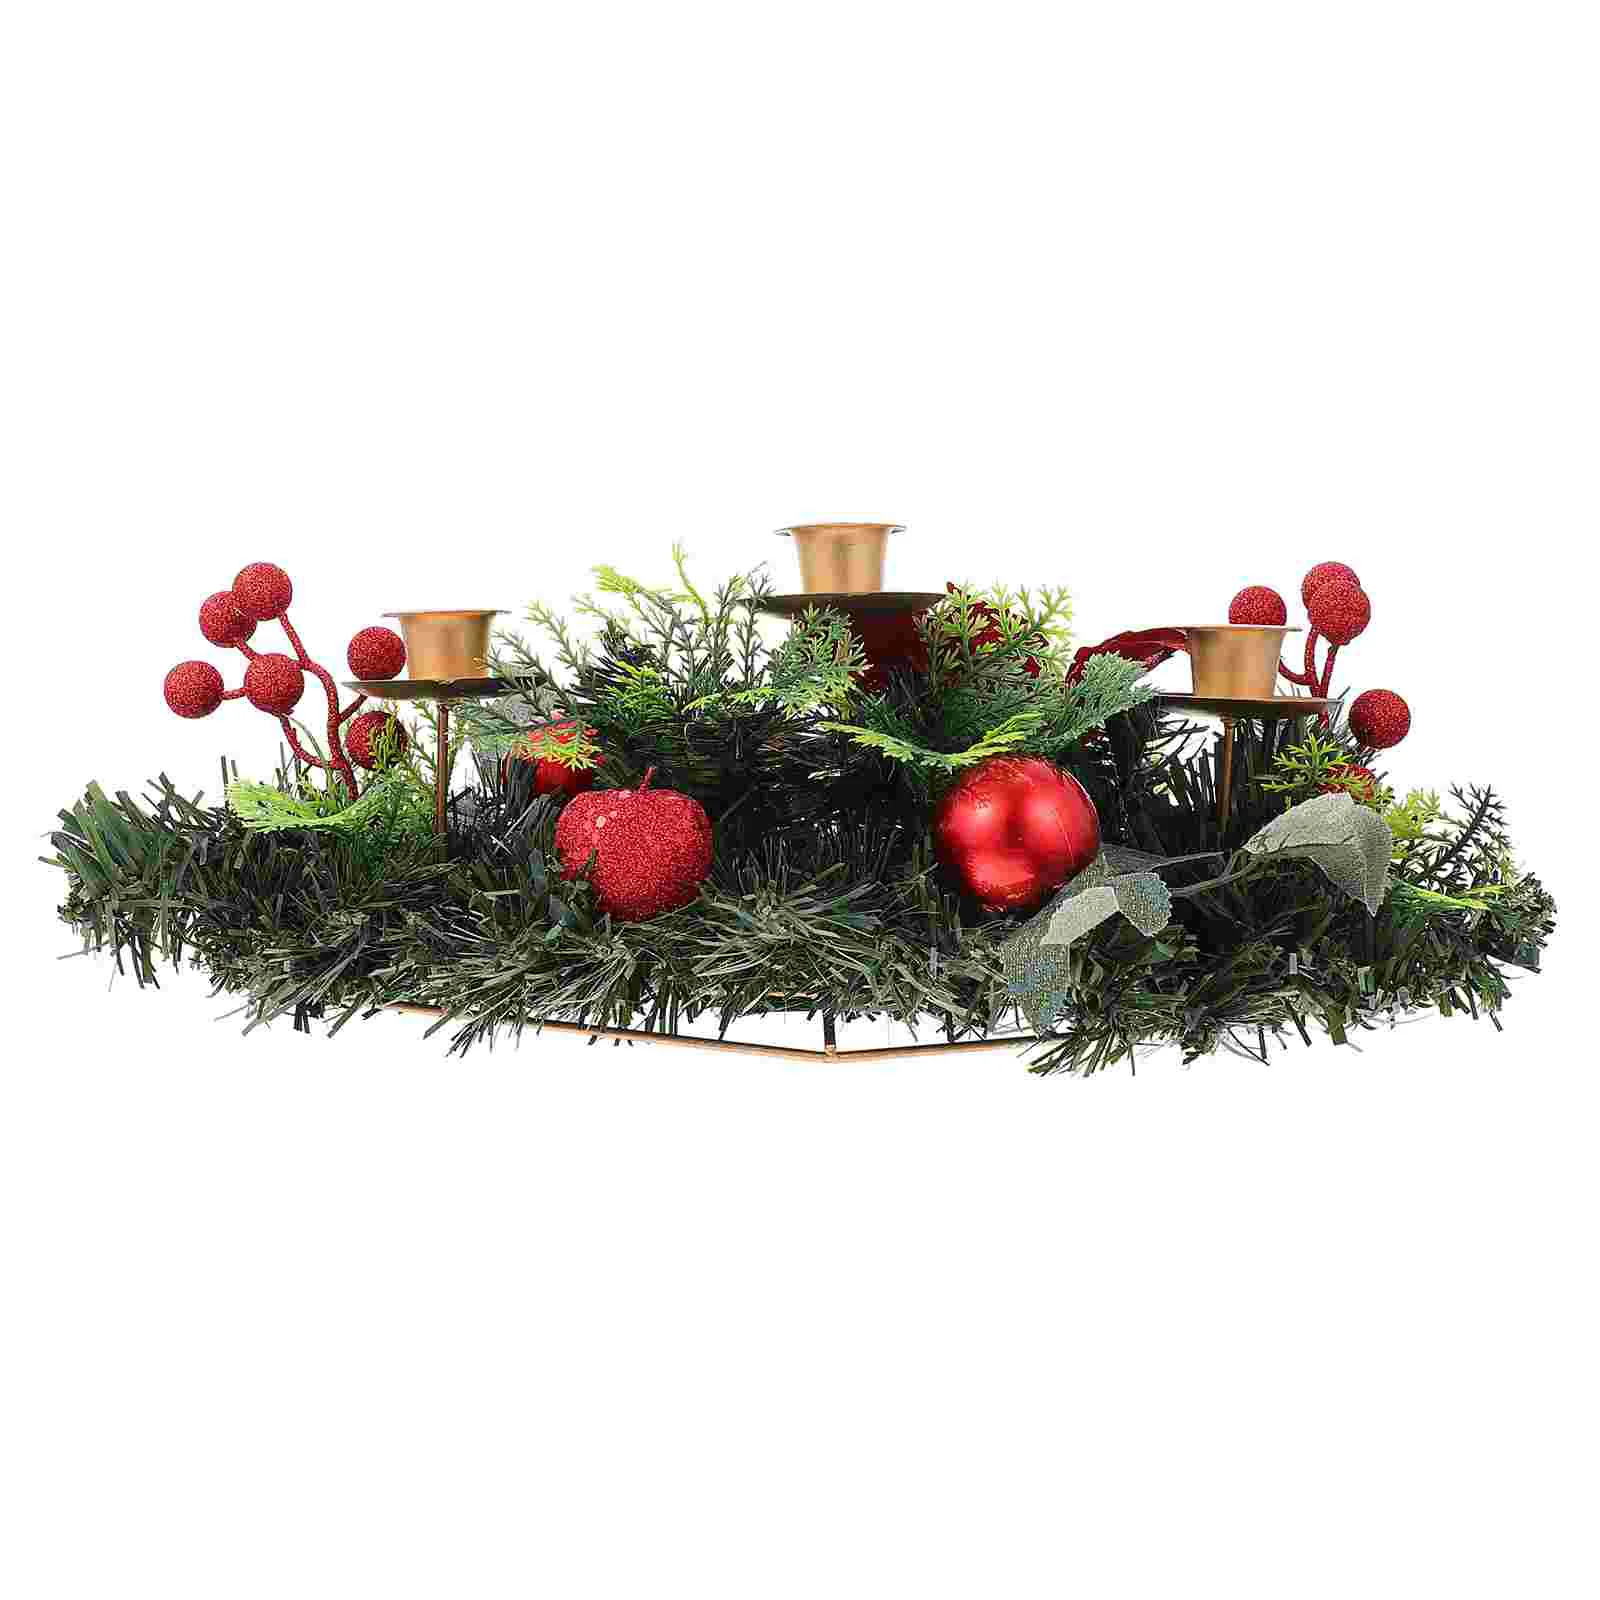 

Christmas Mini Wreath Xmas Wreaths Holder Stand Rings Holiday Ring Candleholder Pretty Iron Rustic Candlestick Tea Light Advent